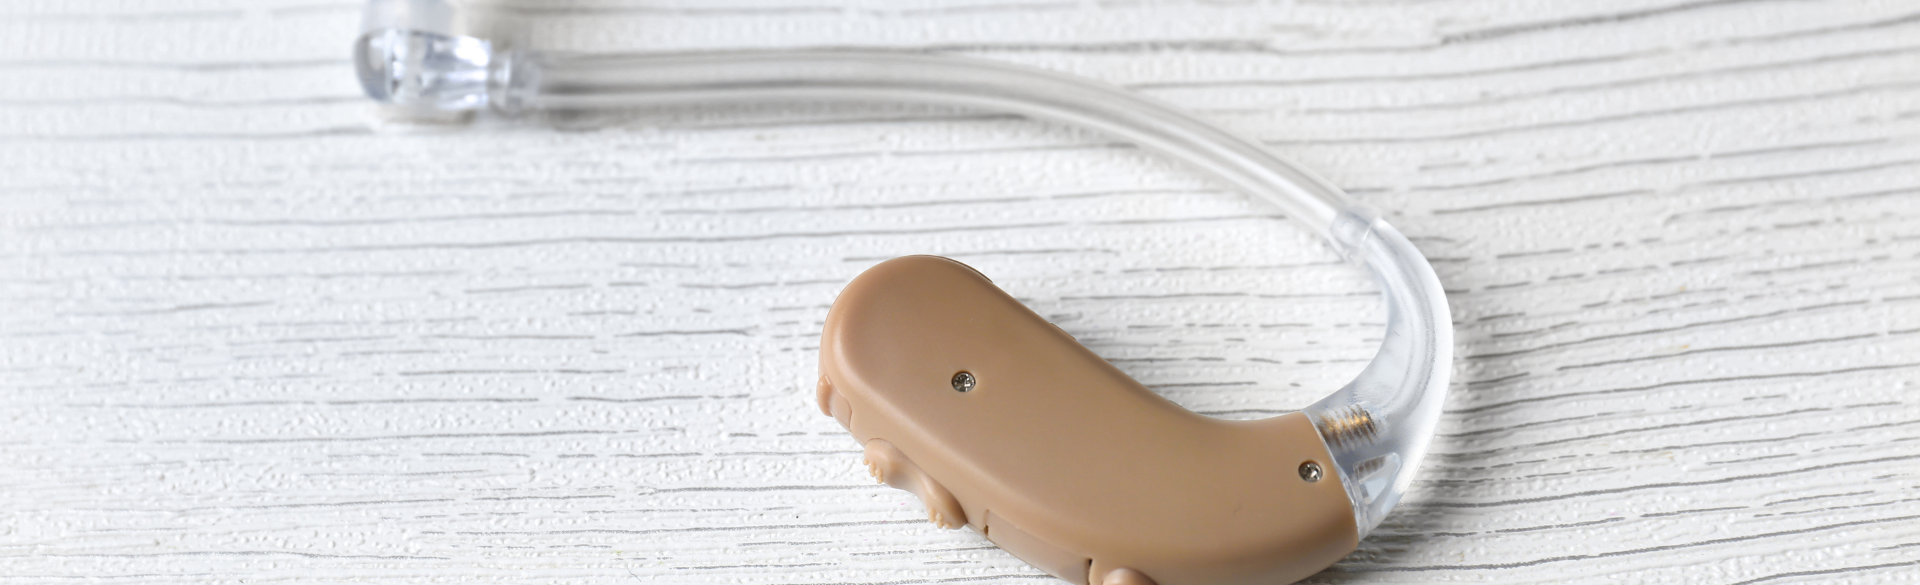 Over-the-counter hearing aids increase the ease of convenience and reduces the price, but there are still some challenges with this new category of device.